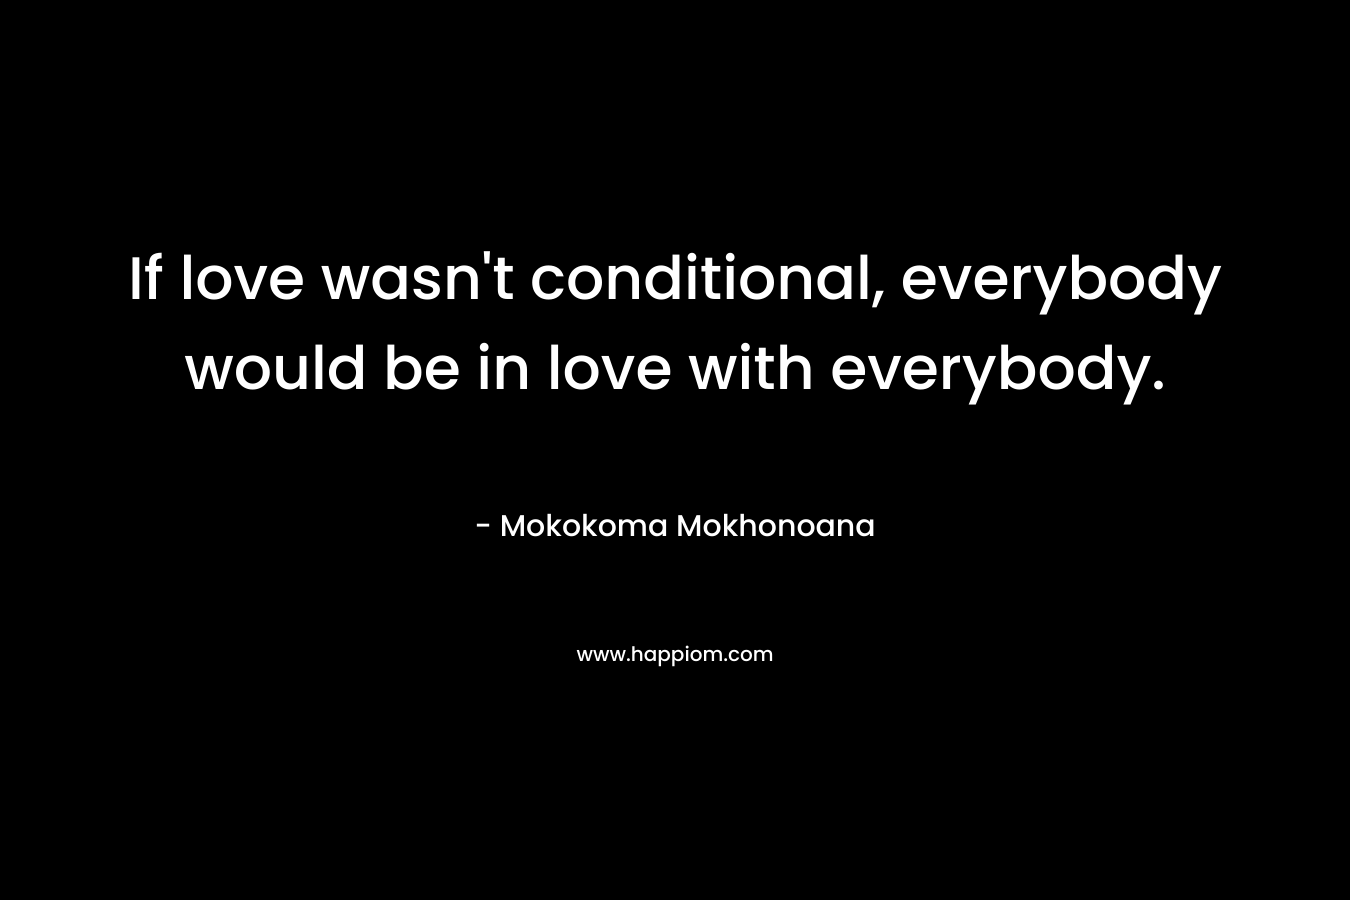 If love wasn't conditional, everybody would be in love with everybody.